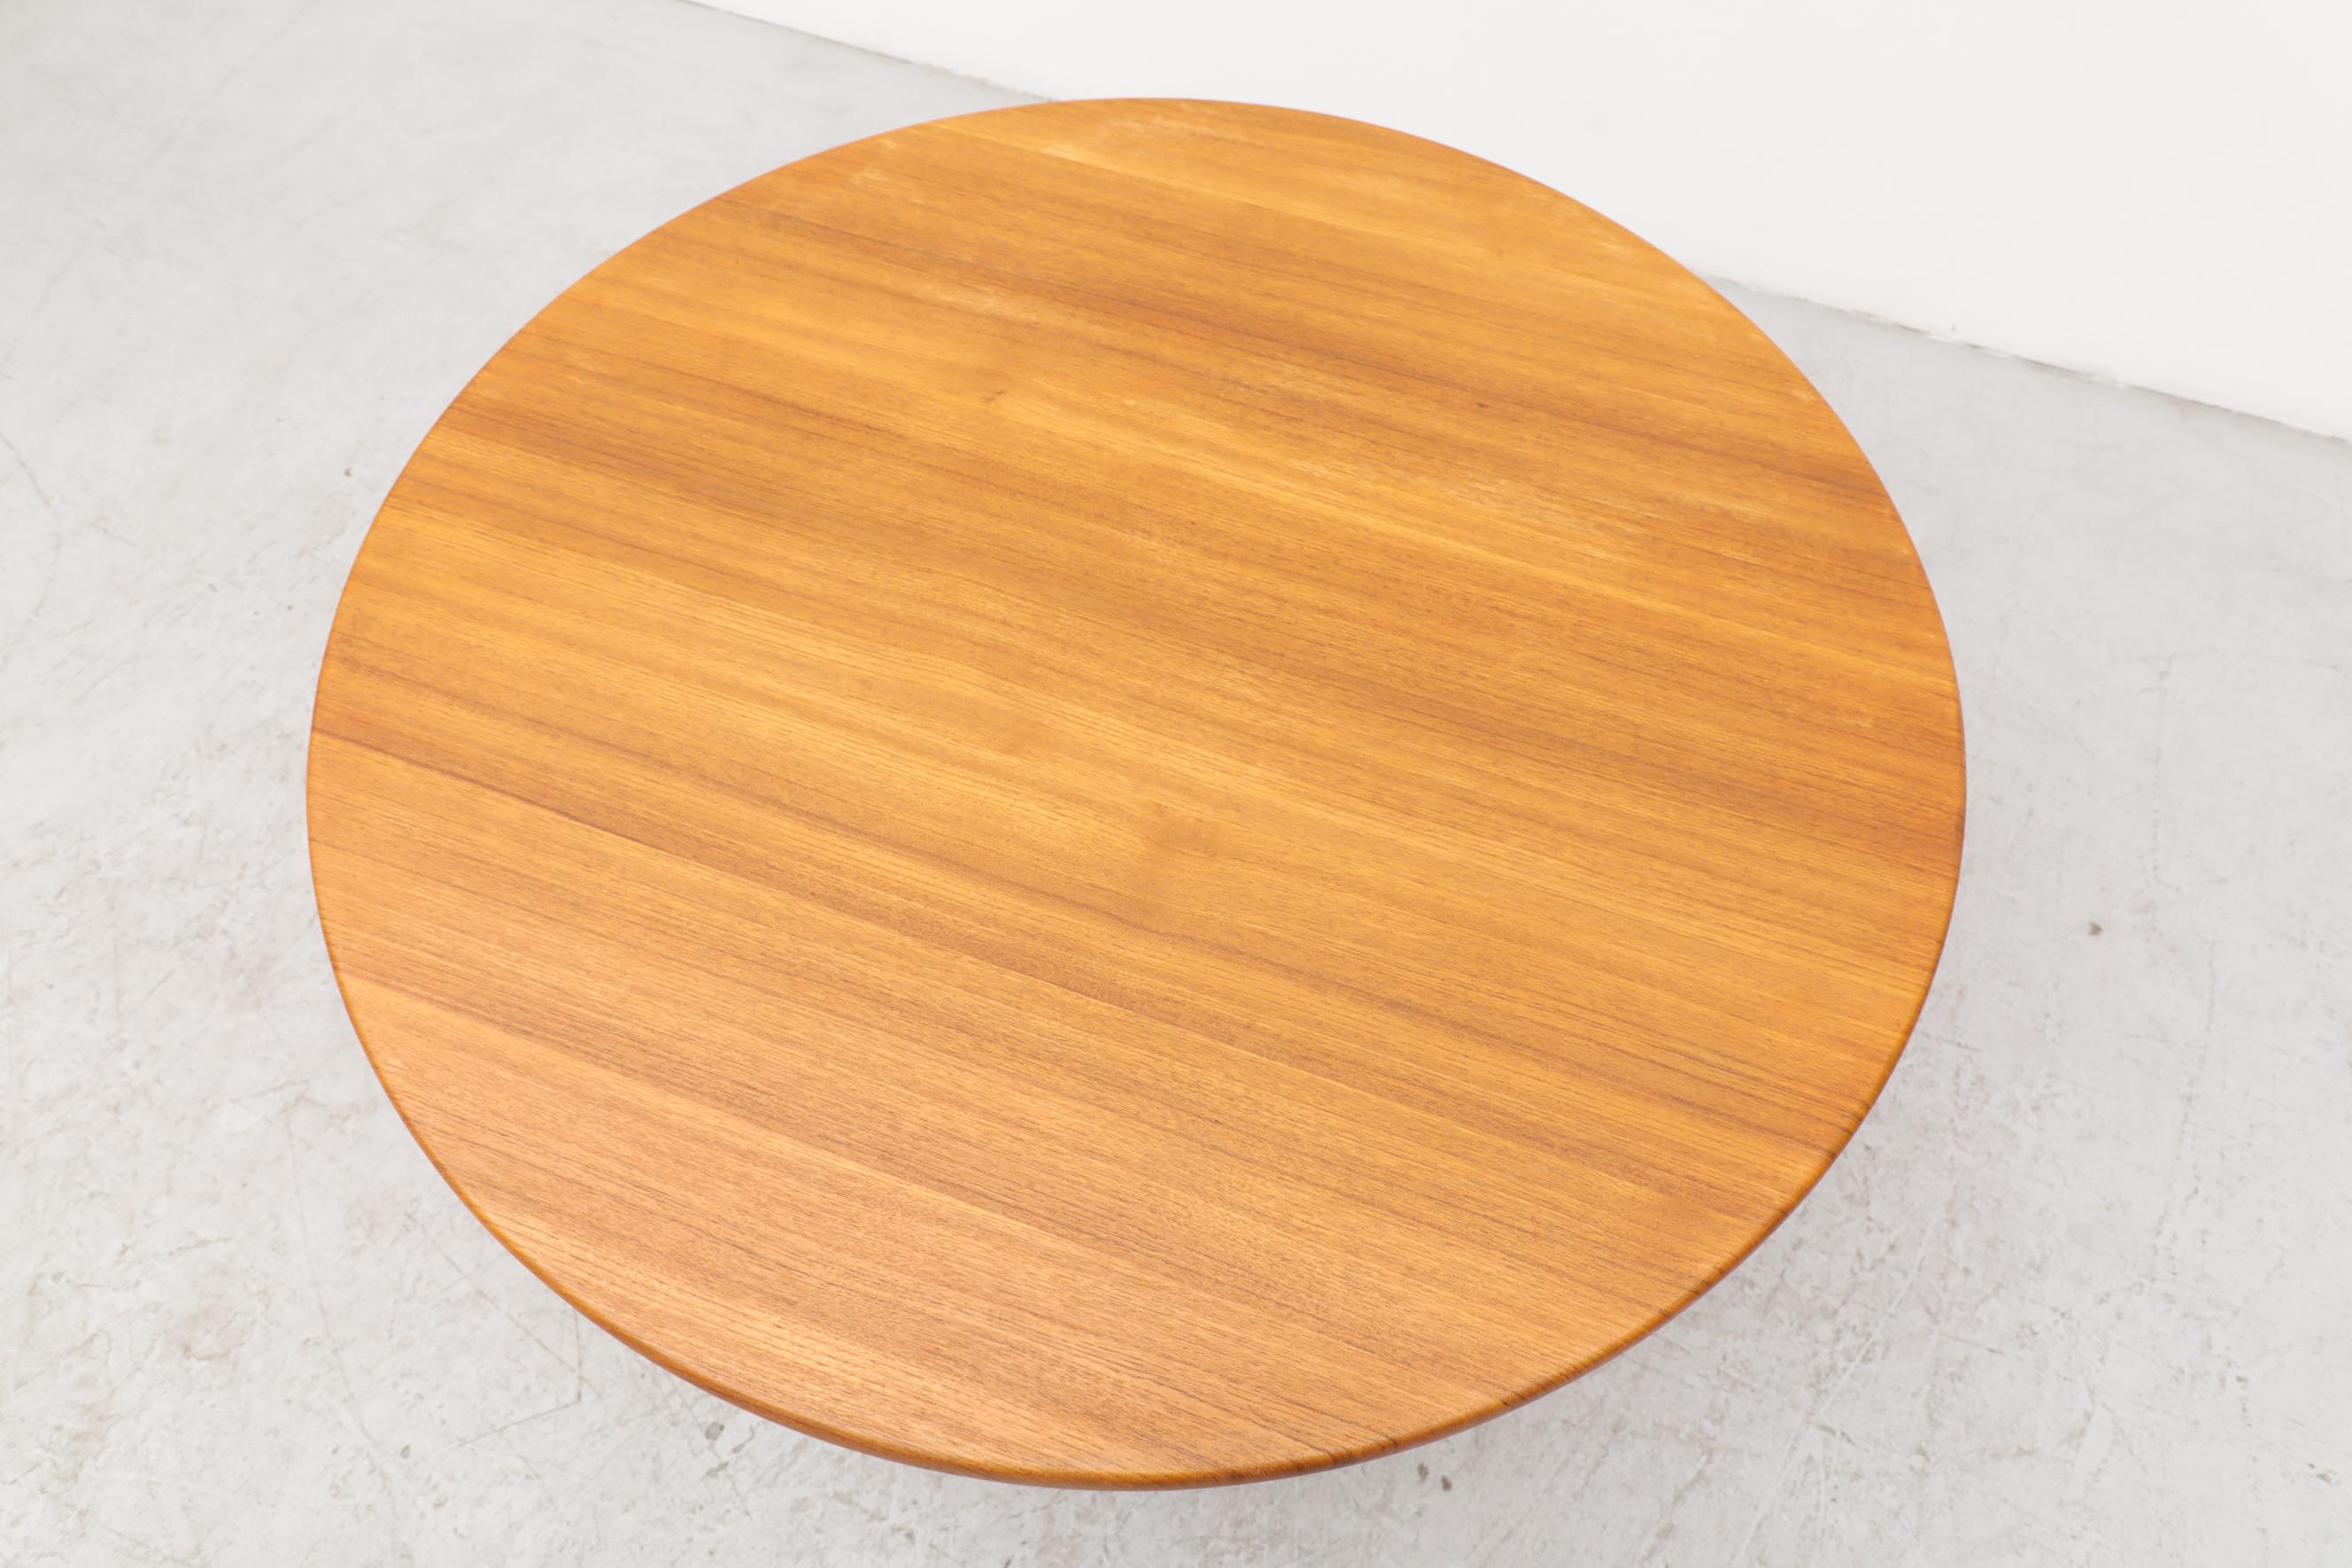 Herman Miller Inspired Solid Wood Topped Mid-Century Pedestal Table 3